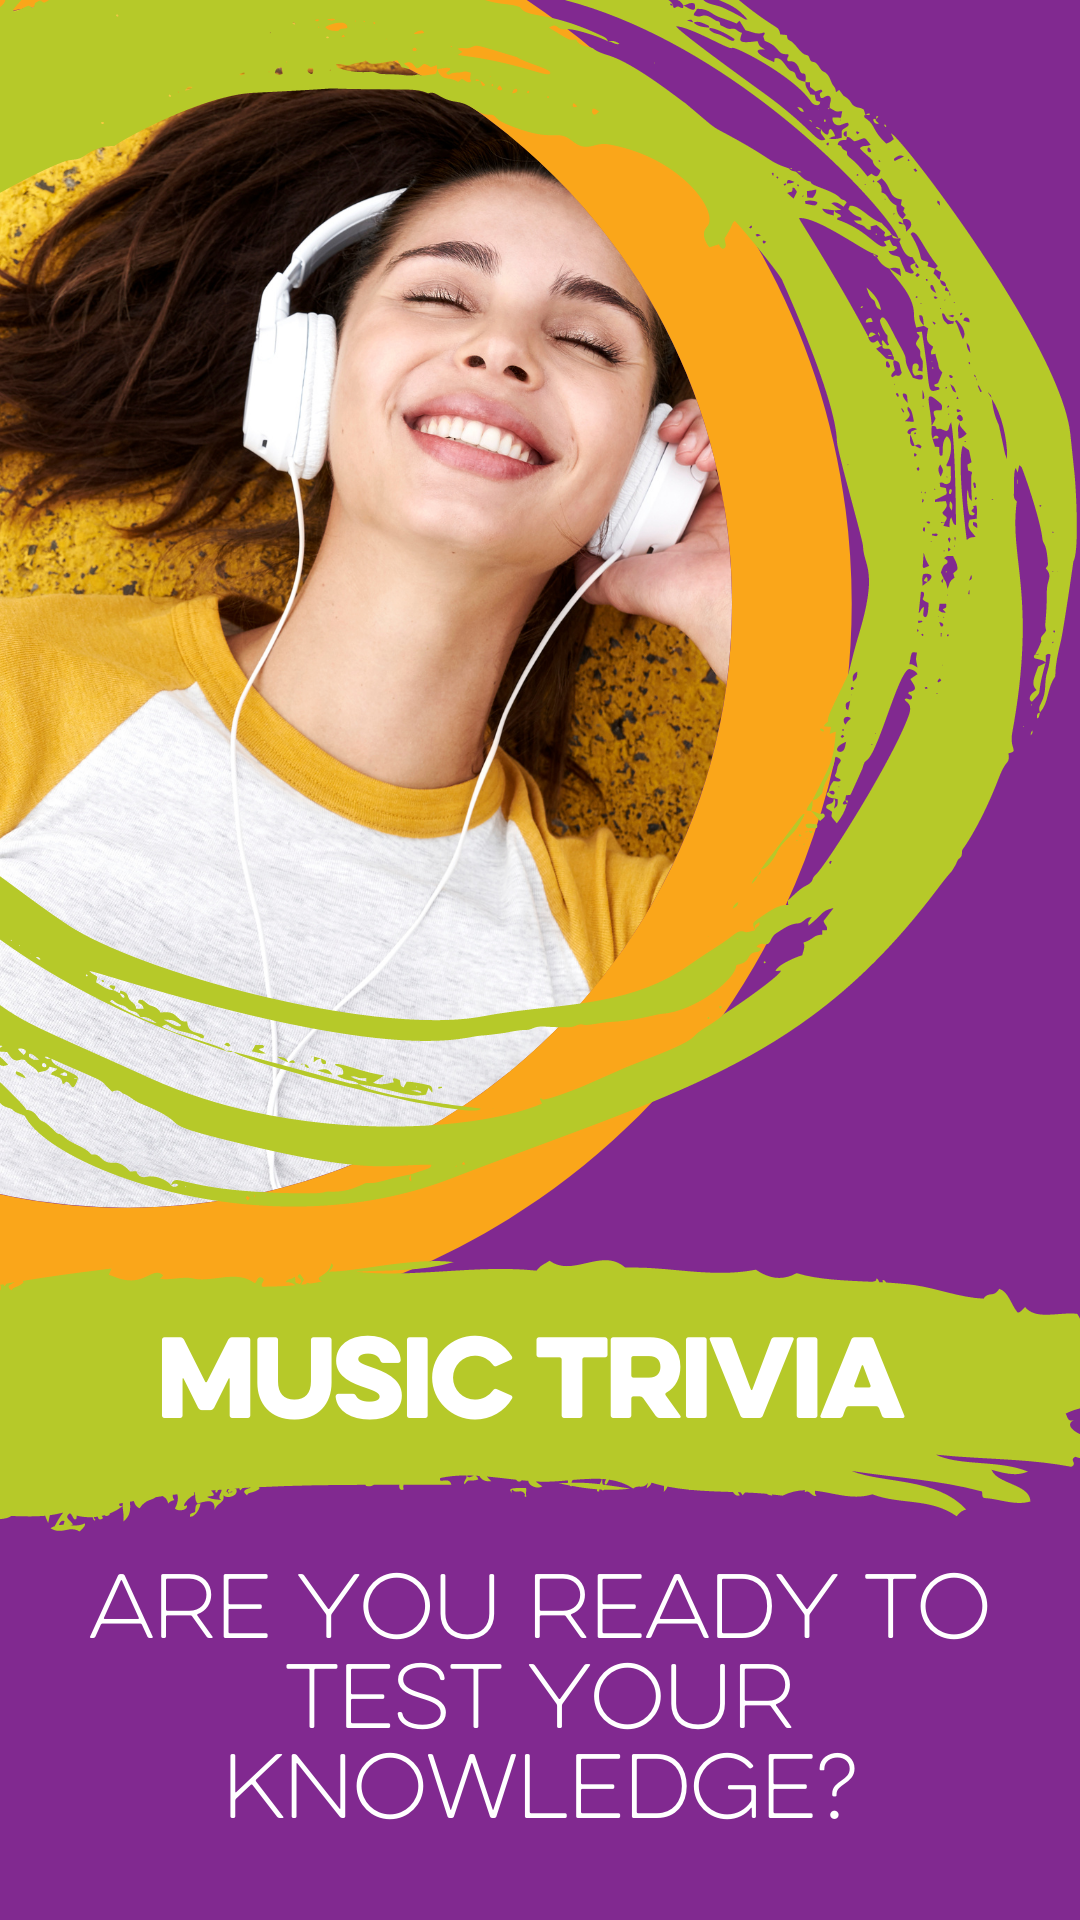 https://www.fusionacademy.com/wp-content/uploads/2021/06/Music-Trivia.png